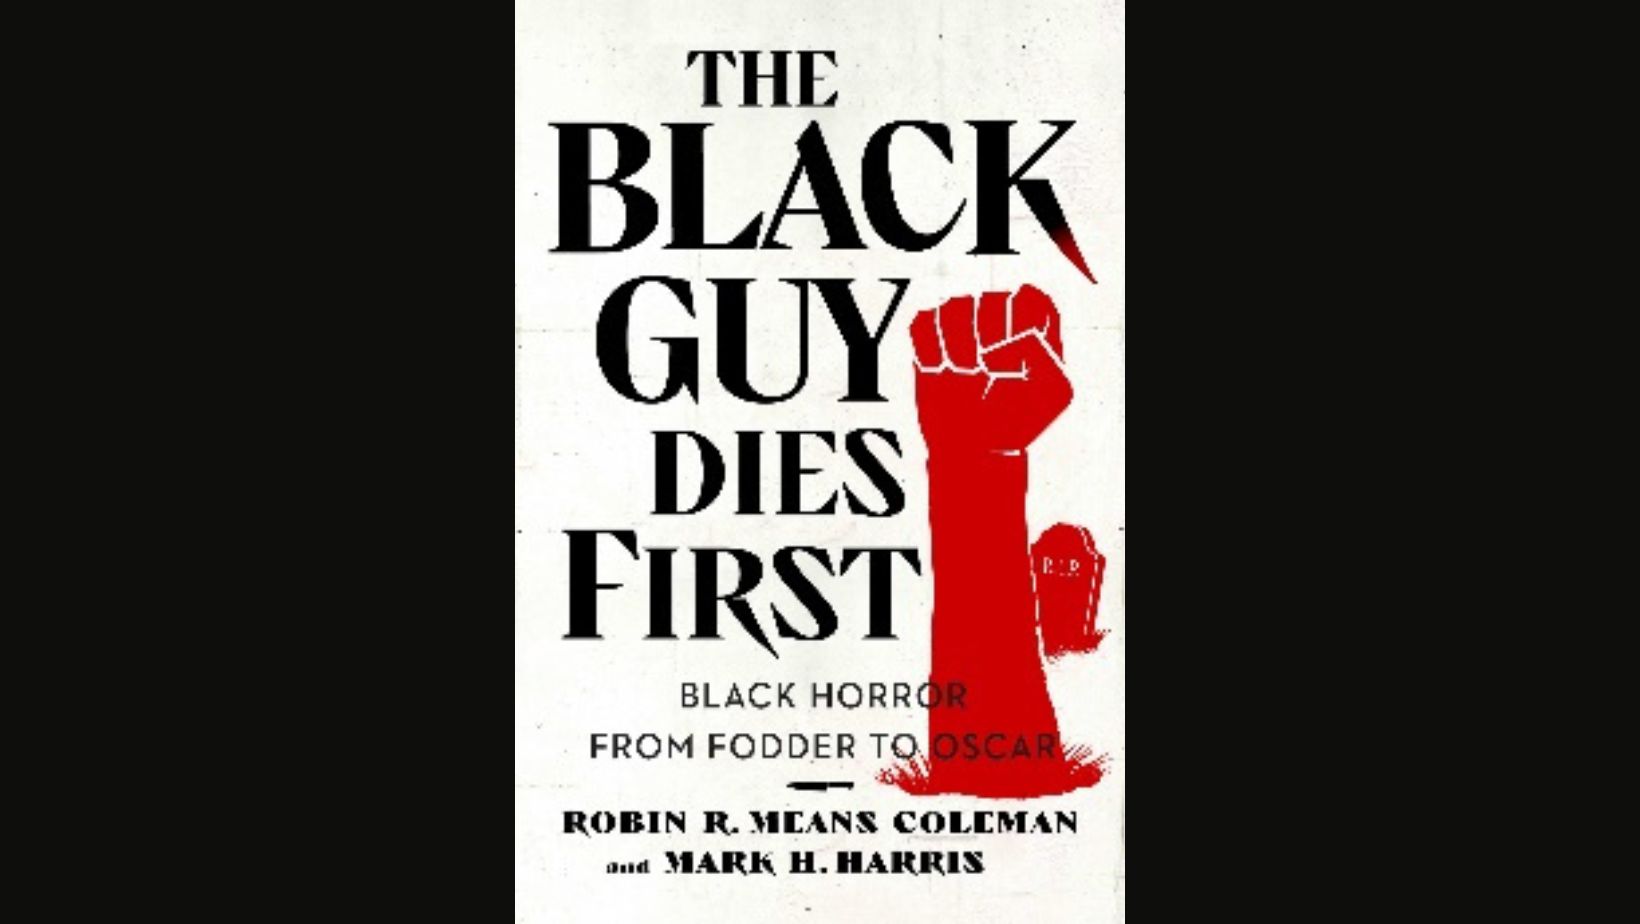 [Book Review] THE BLACK GUY DIES FIRST: BLACK HORROR FROM FODDER TO OSCAR